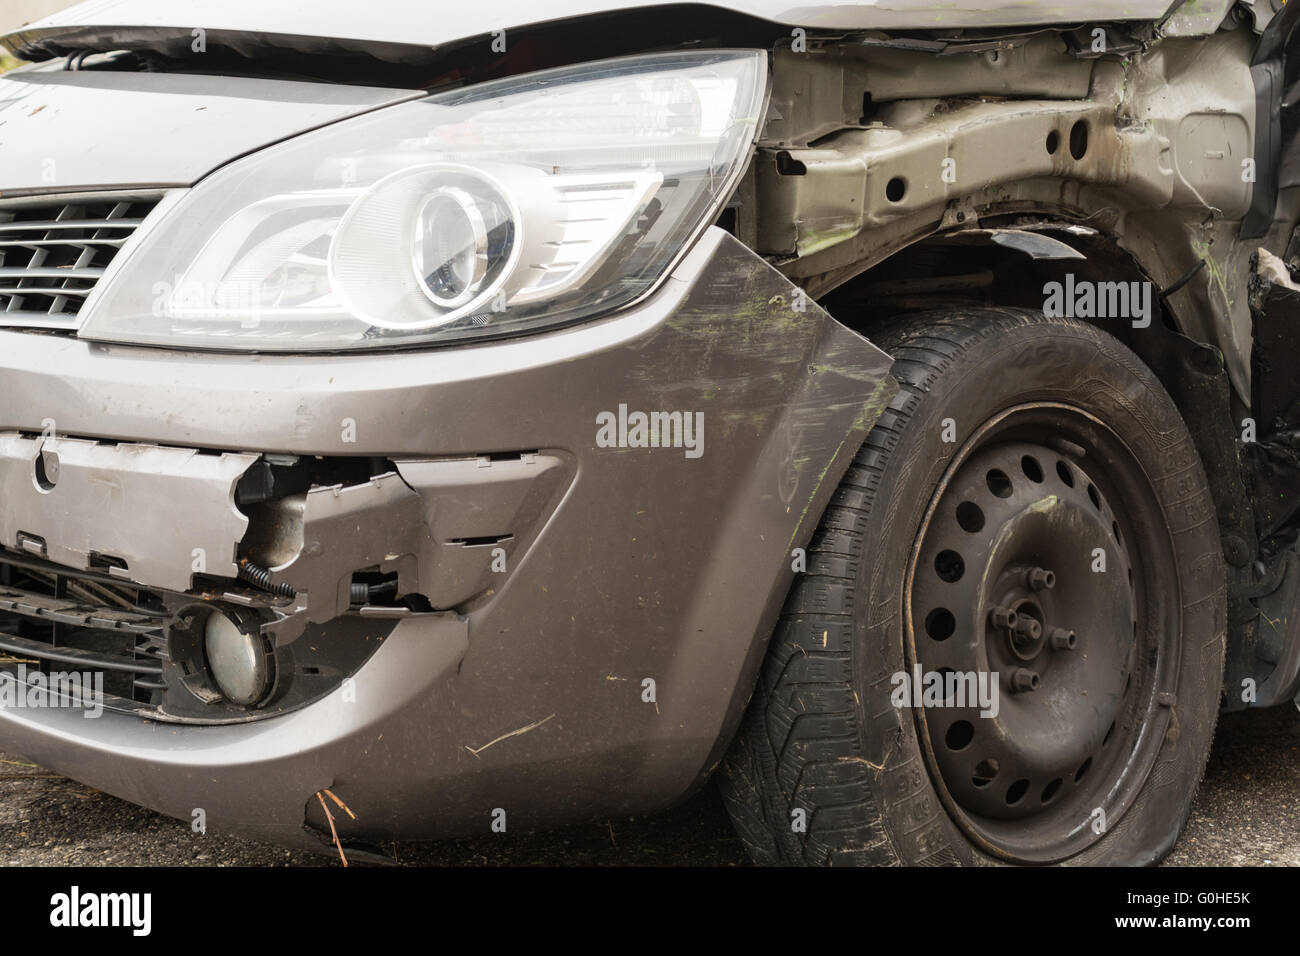 Car with a total loss after an accident Stock Photo